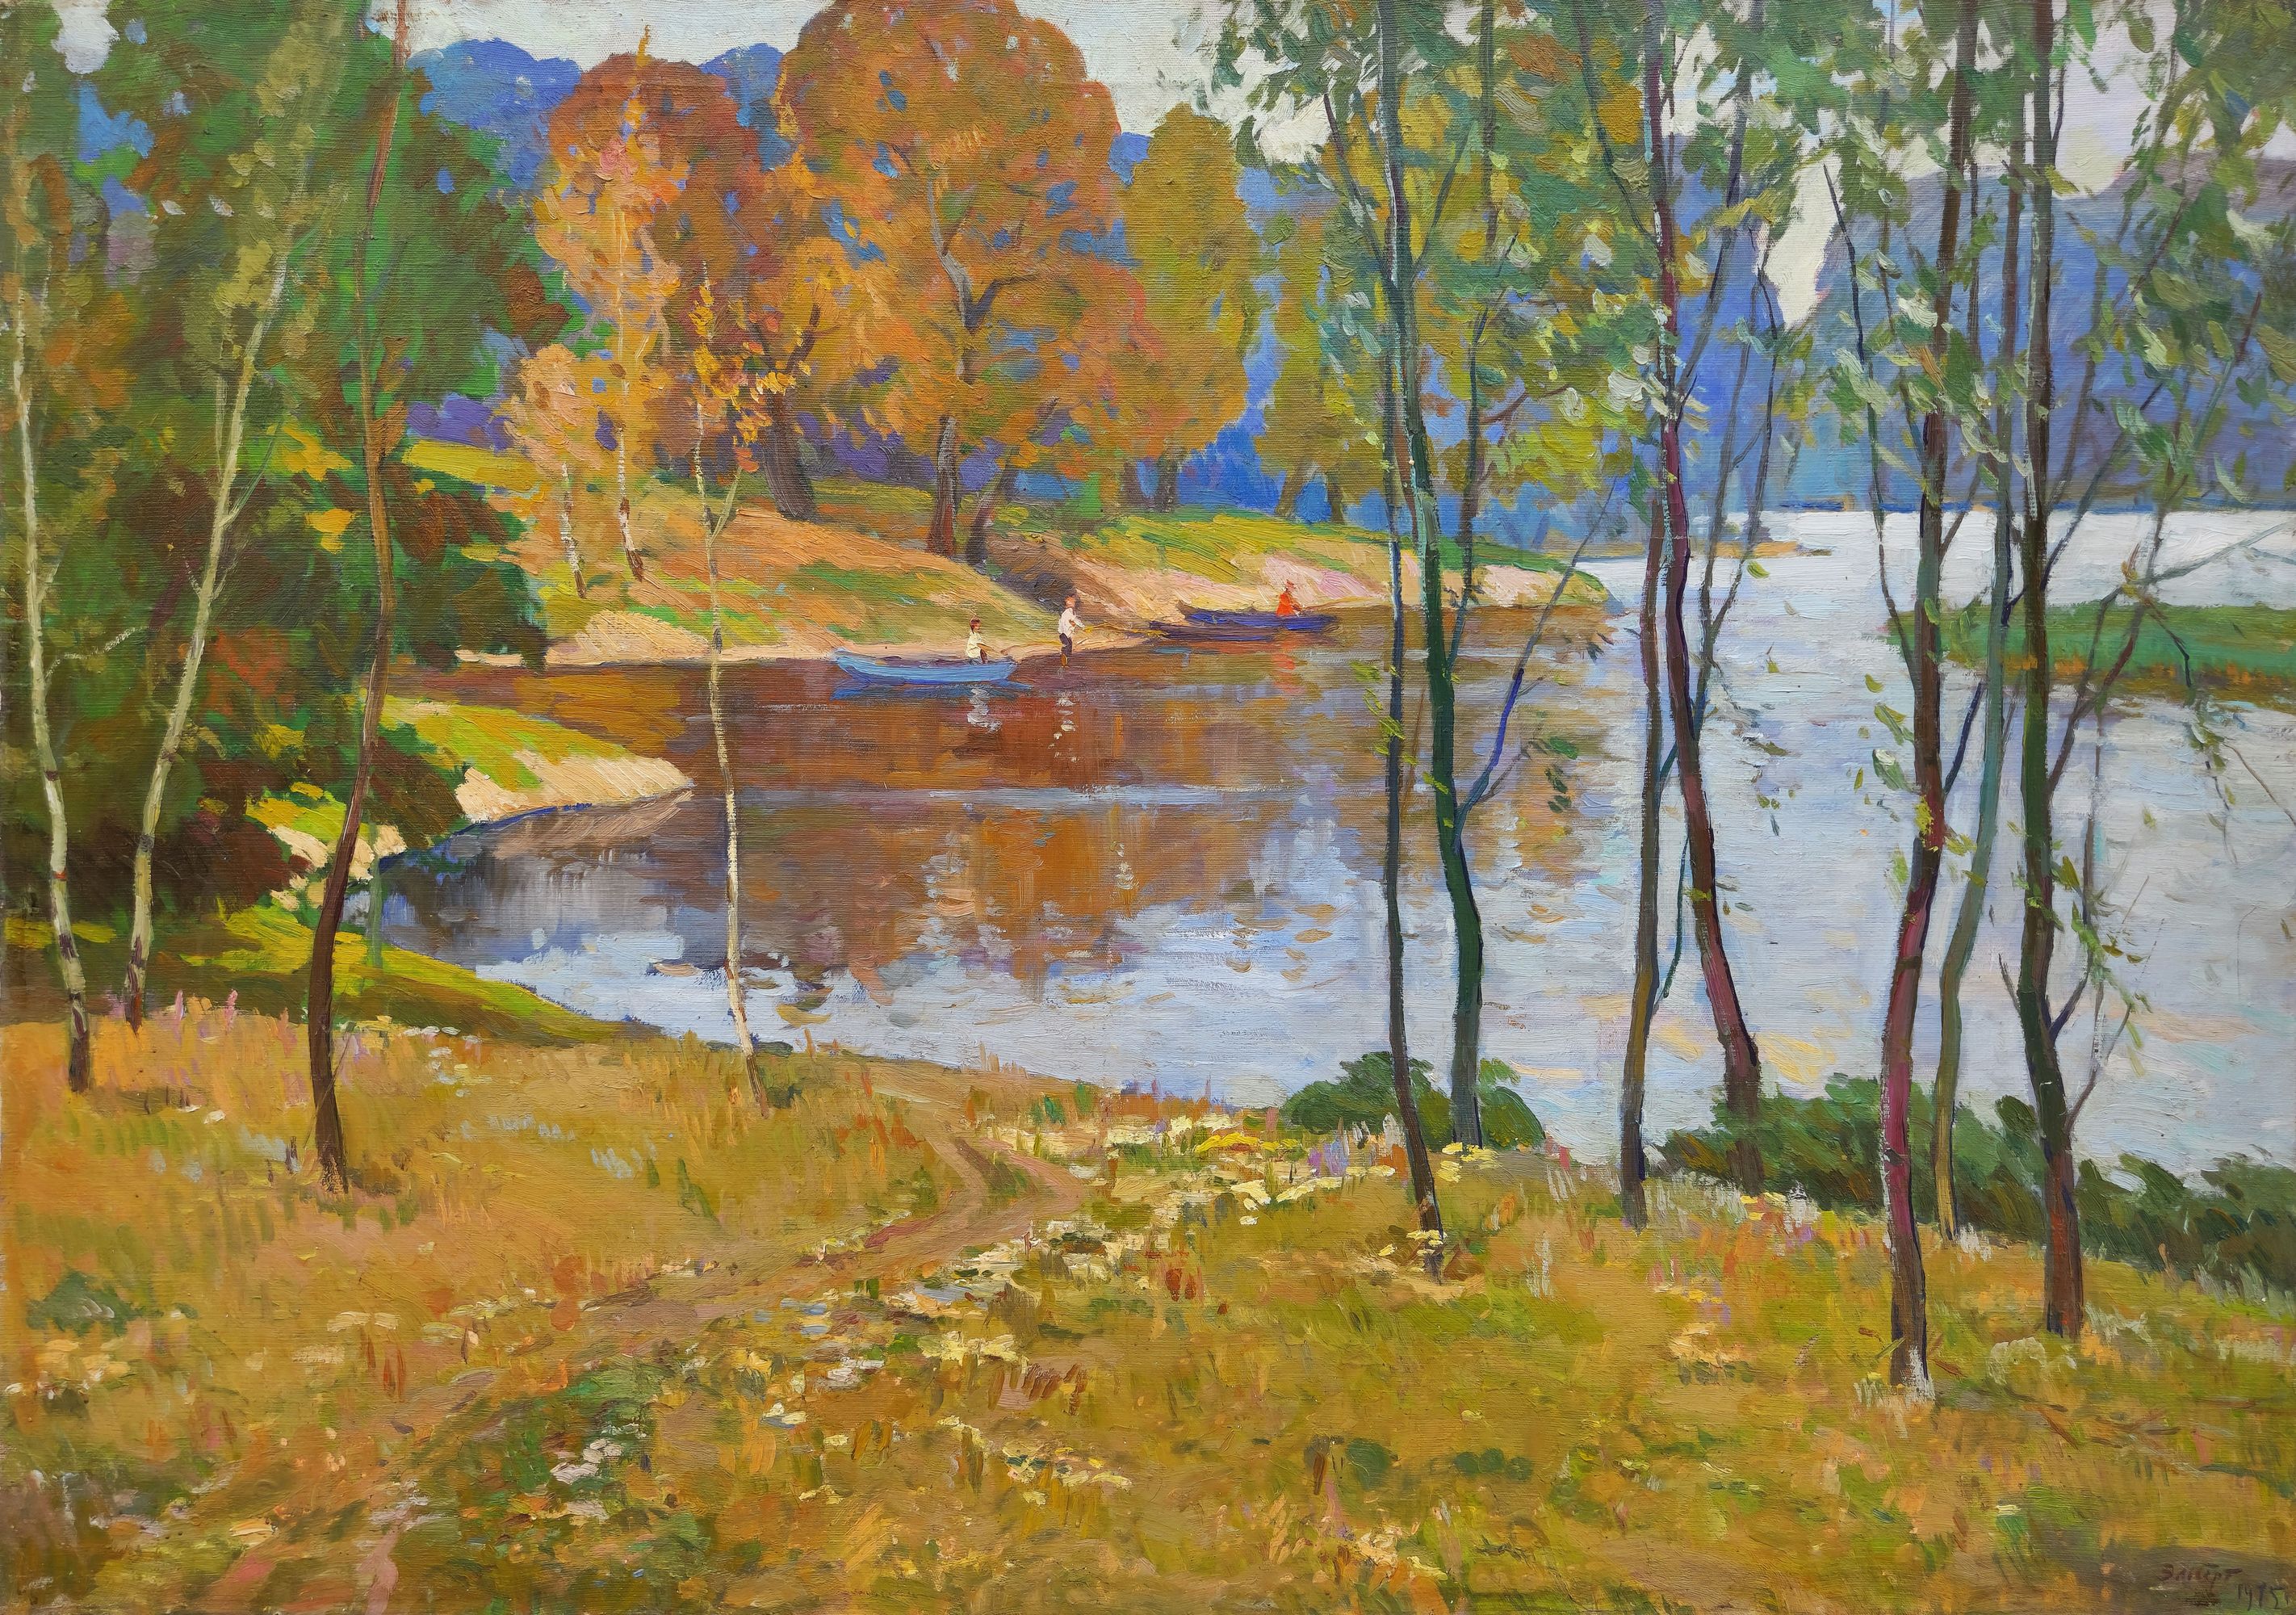 "On the river"